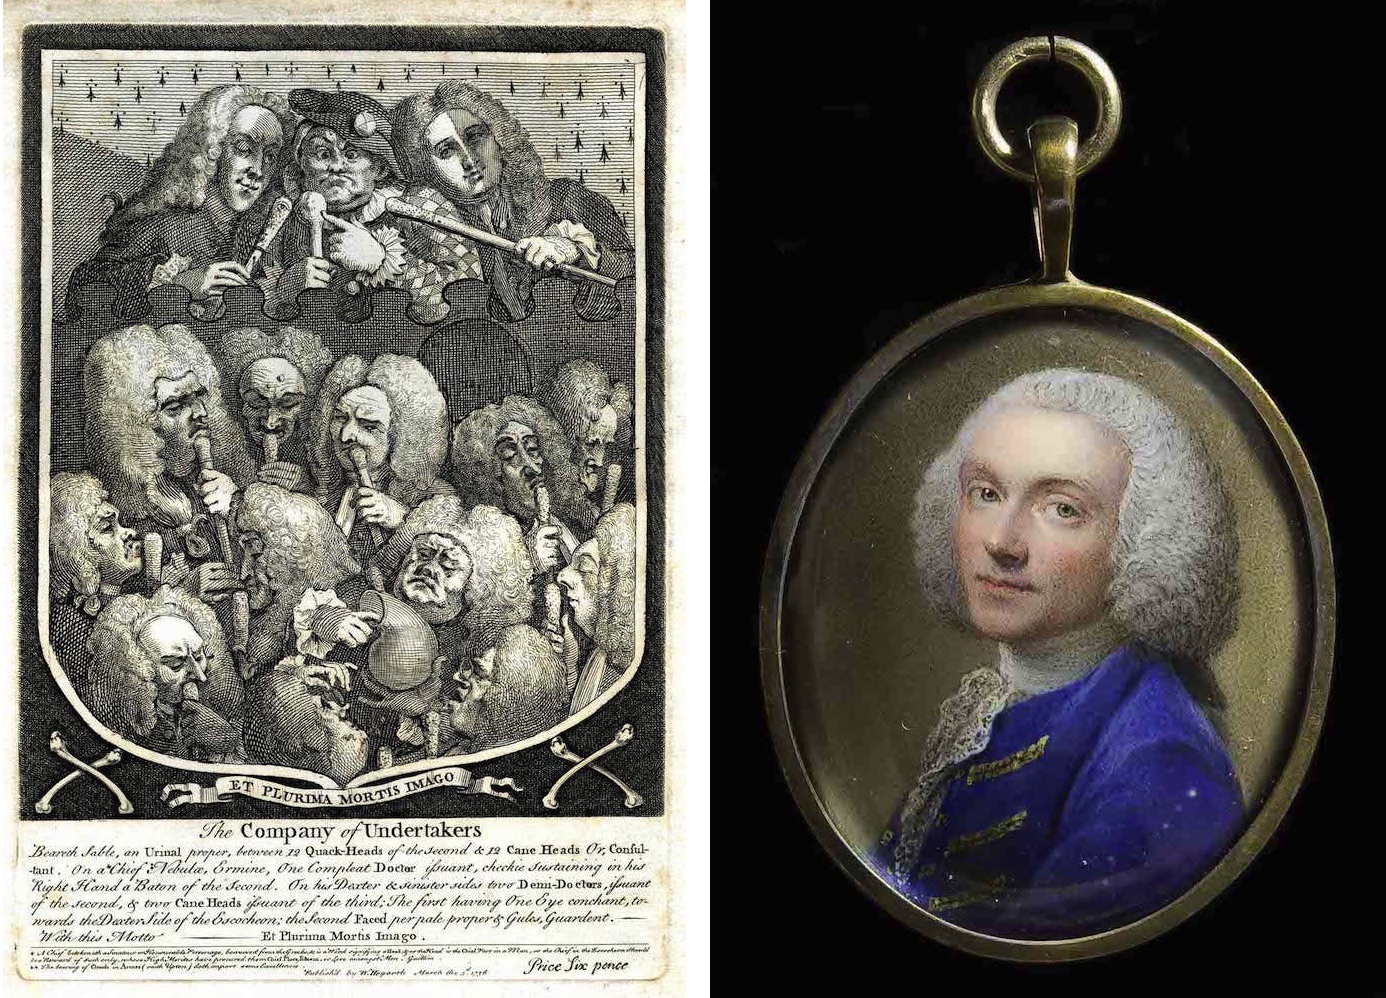 Print of satirical image of physicians of 1800s in an imaginary shield & portrait of William Hunter